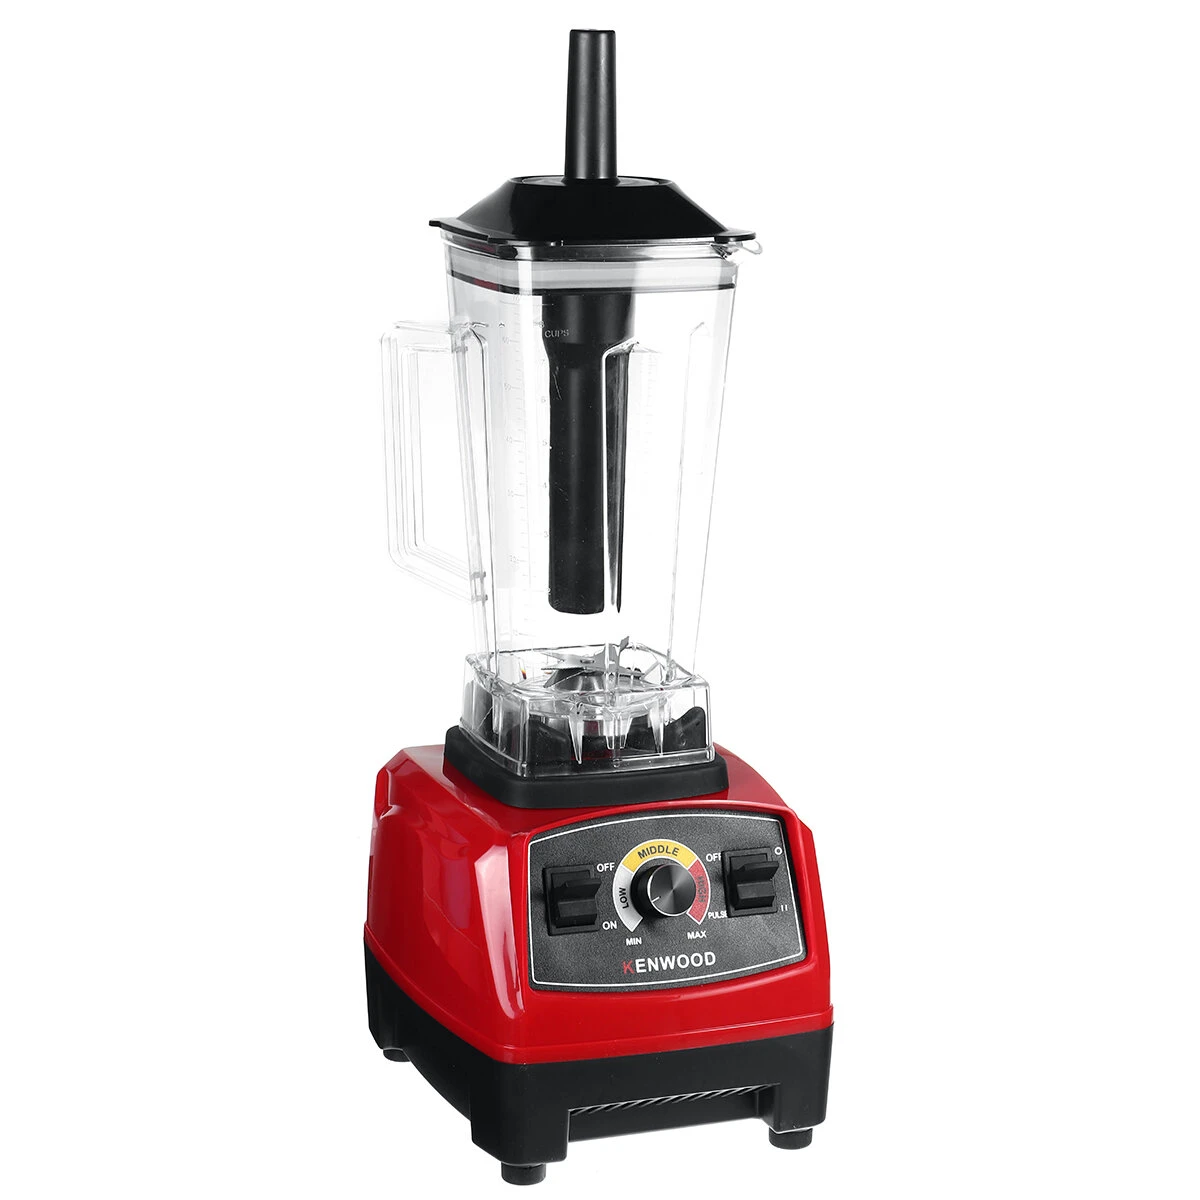 Commercial Blender Mixer Food Processor Kitchen Juicer Smoothie Ice Crush 3500W - Red EU Plug